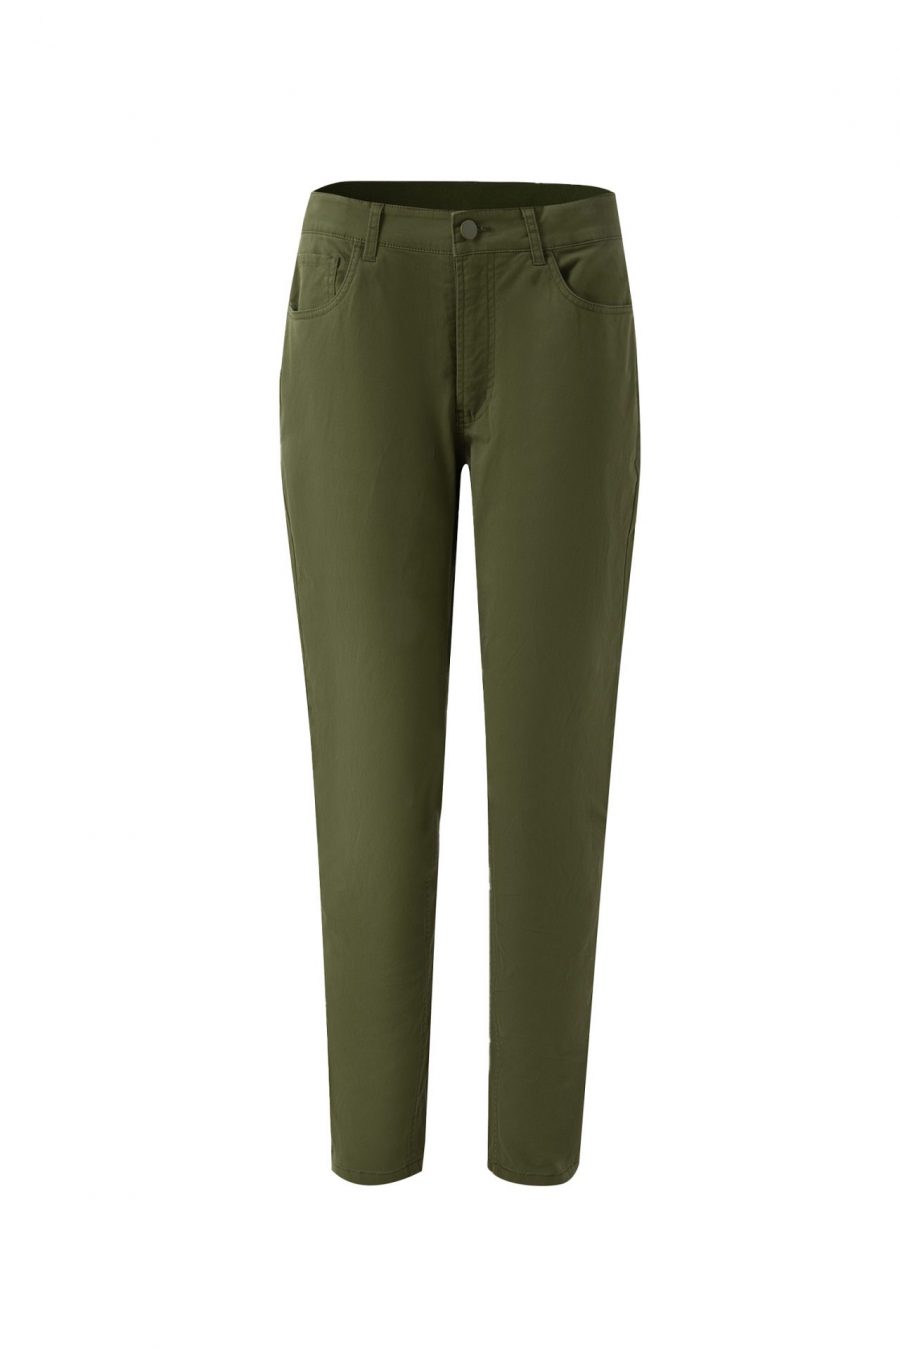 MPL900215A Classic Tapered Slim fit Chino Trousers KHAKI GREEN